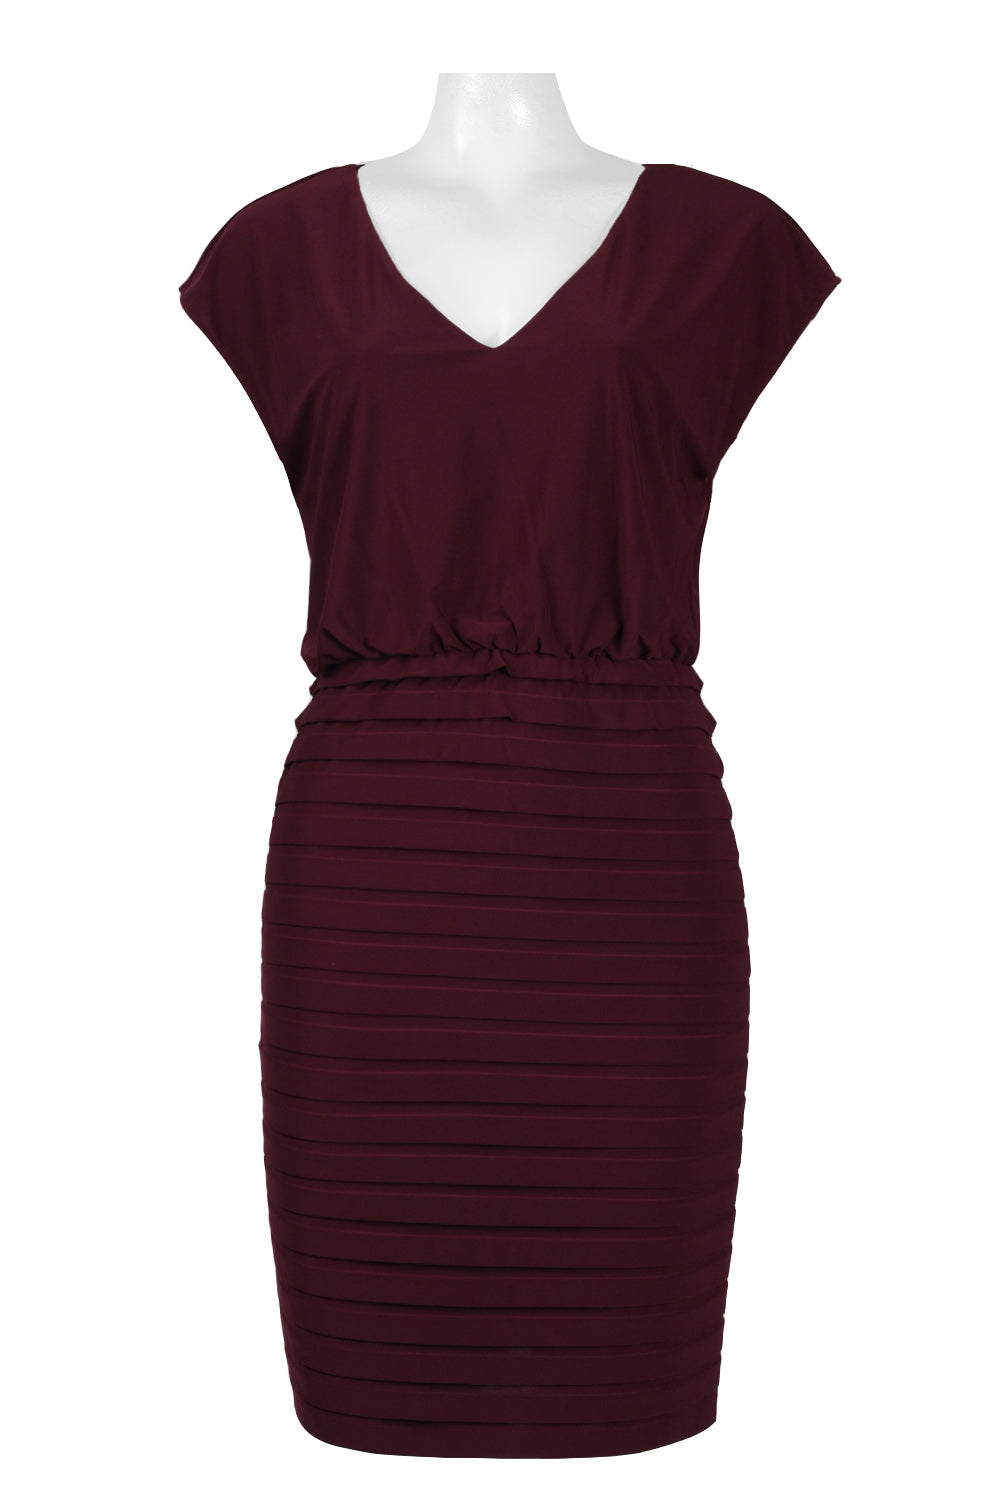 Adrianna Papell Cap Sleeve Banded Jersey Dress